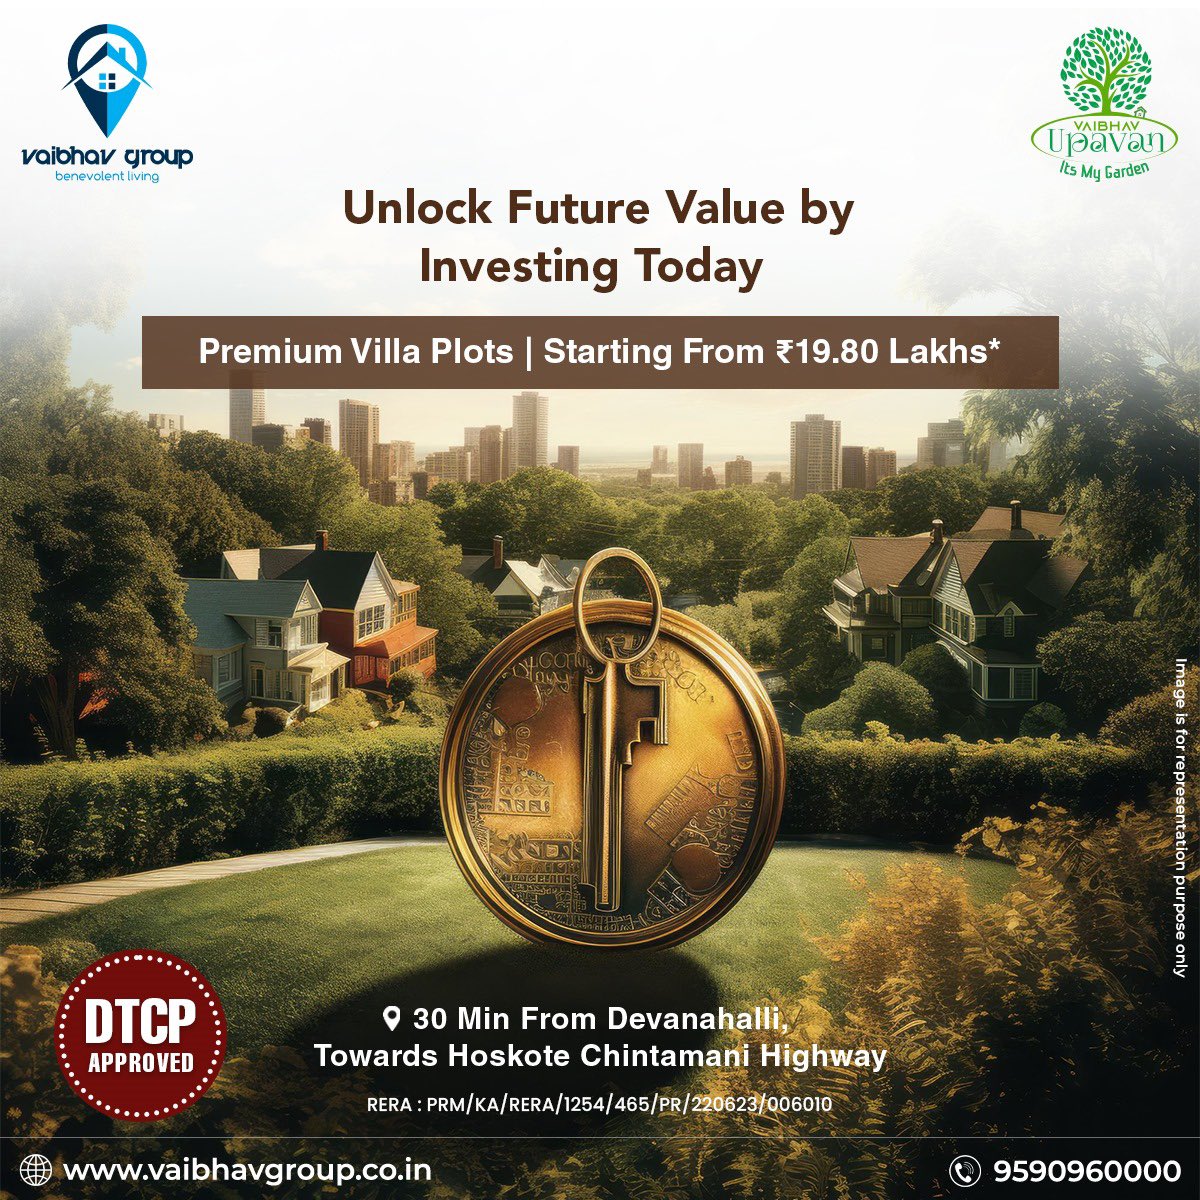 Unlock your future by investing today with premium villa plots starting at ₹19.80 Lakhs* in Jangamakote, Bangalore, offered by Vaibhav Upavan from Vaibhav Group.”

#VaibhavGroup #investforthefuture #investforkids #investinplots
#PlotsForSale #ResidentialPlots #LandForSale